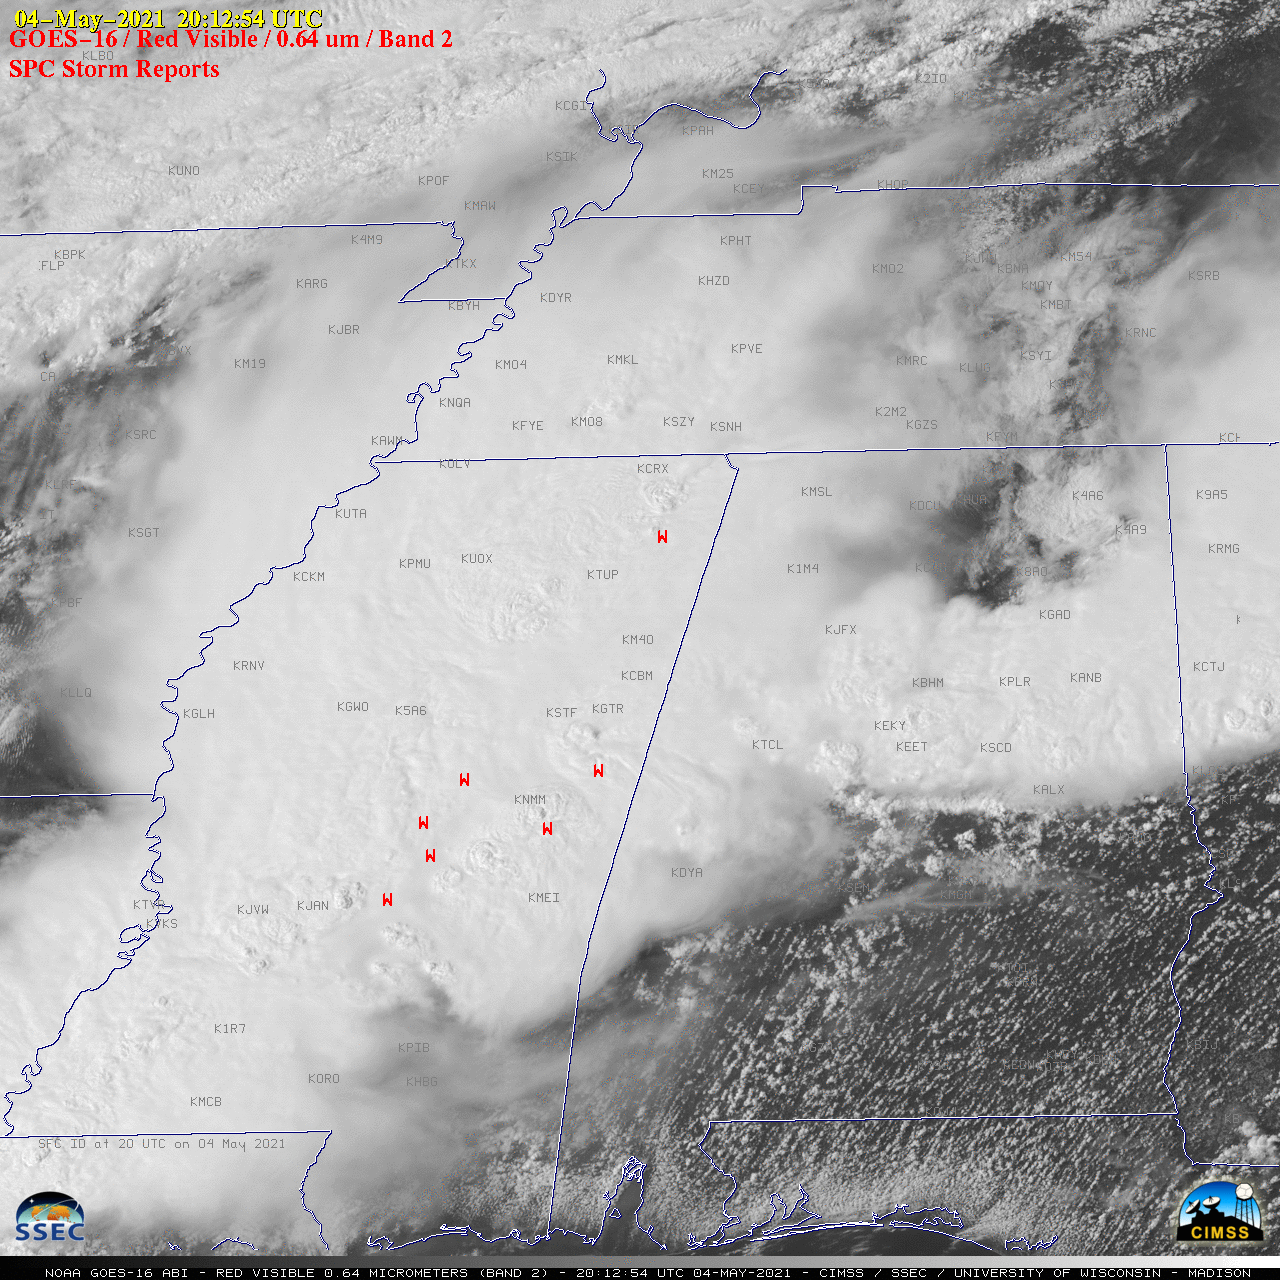 GOES-16 “Red” Visible (0.64 µm) images, with SPC Storm Reports plotted in red [click to play animation | MP4]